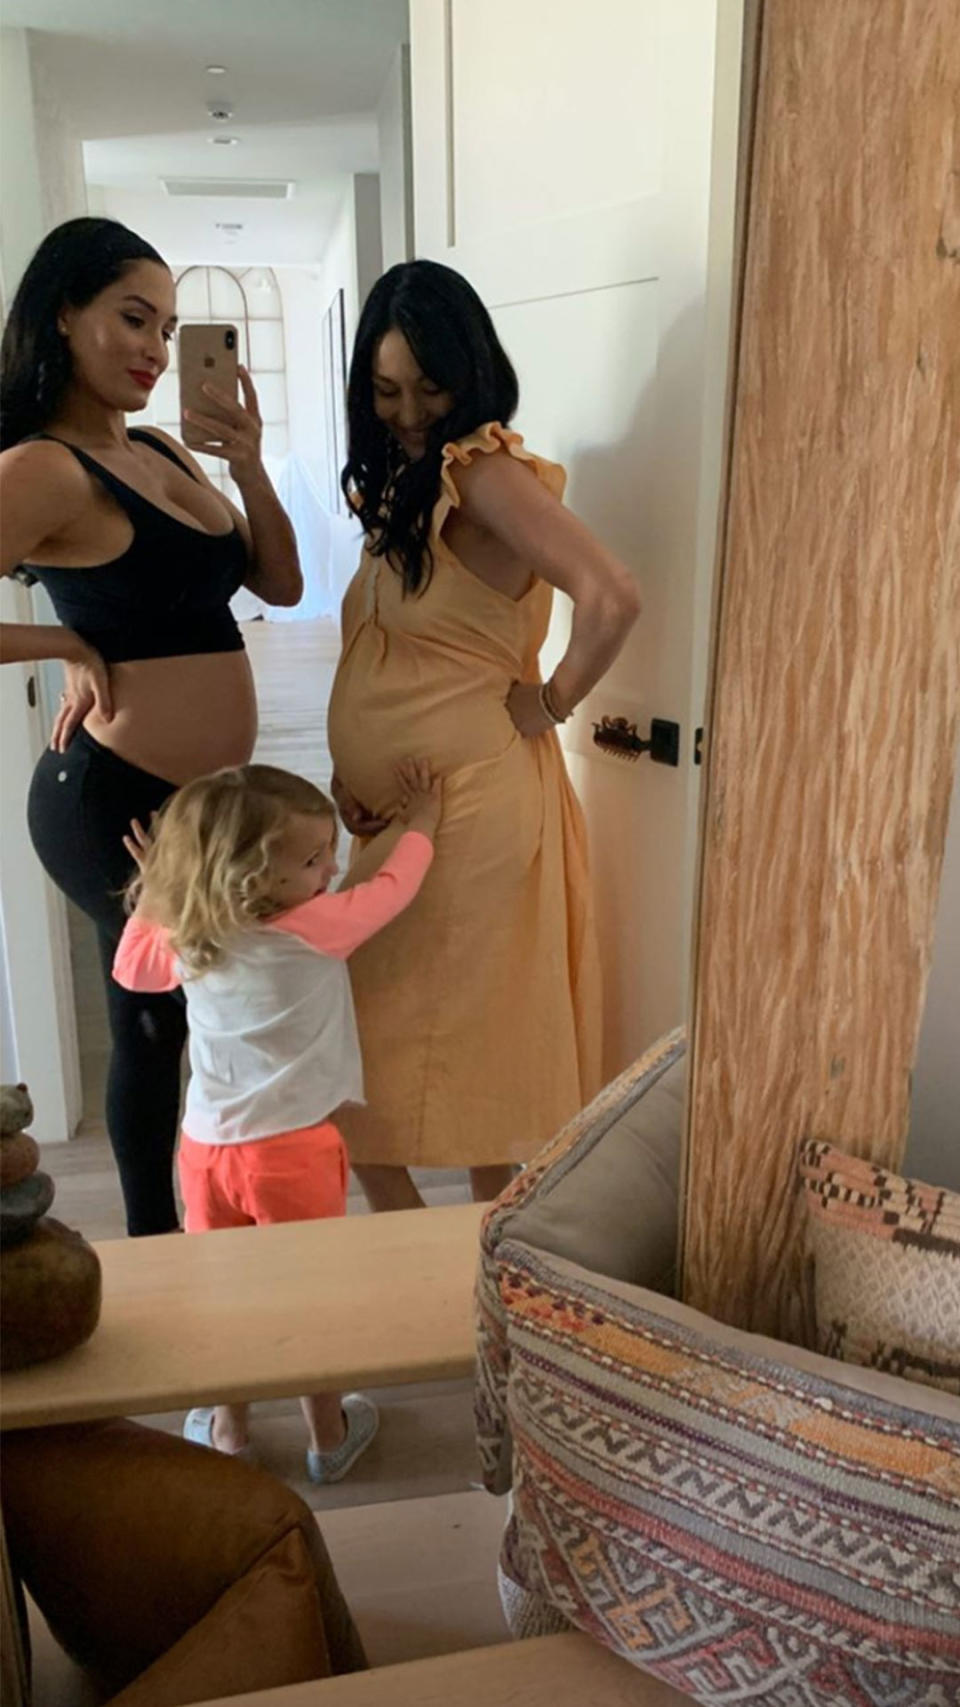 That's Some Serious #Twinning! Check Out Pregnant Nikki and Brie Bella's Growing Baby Bumps